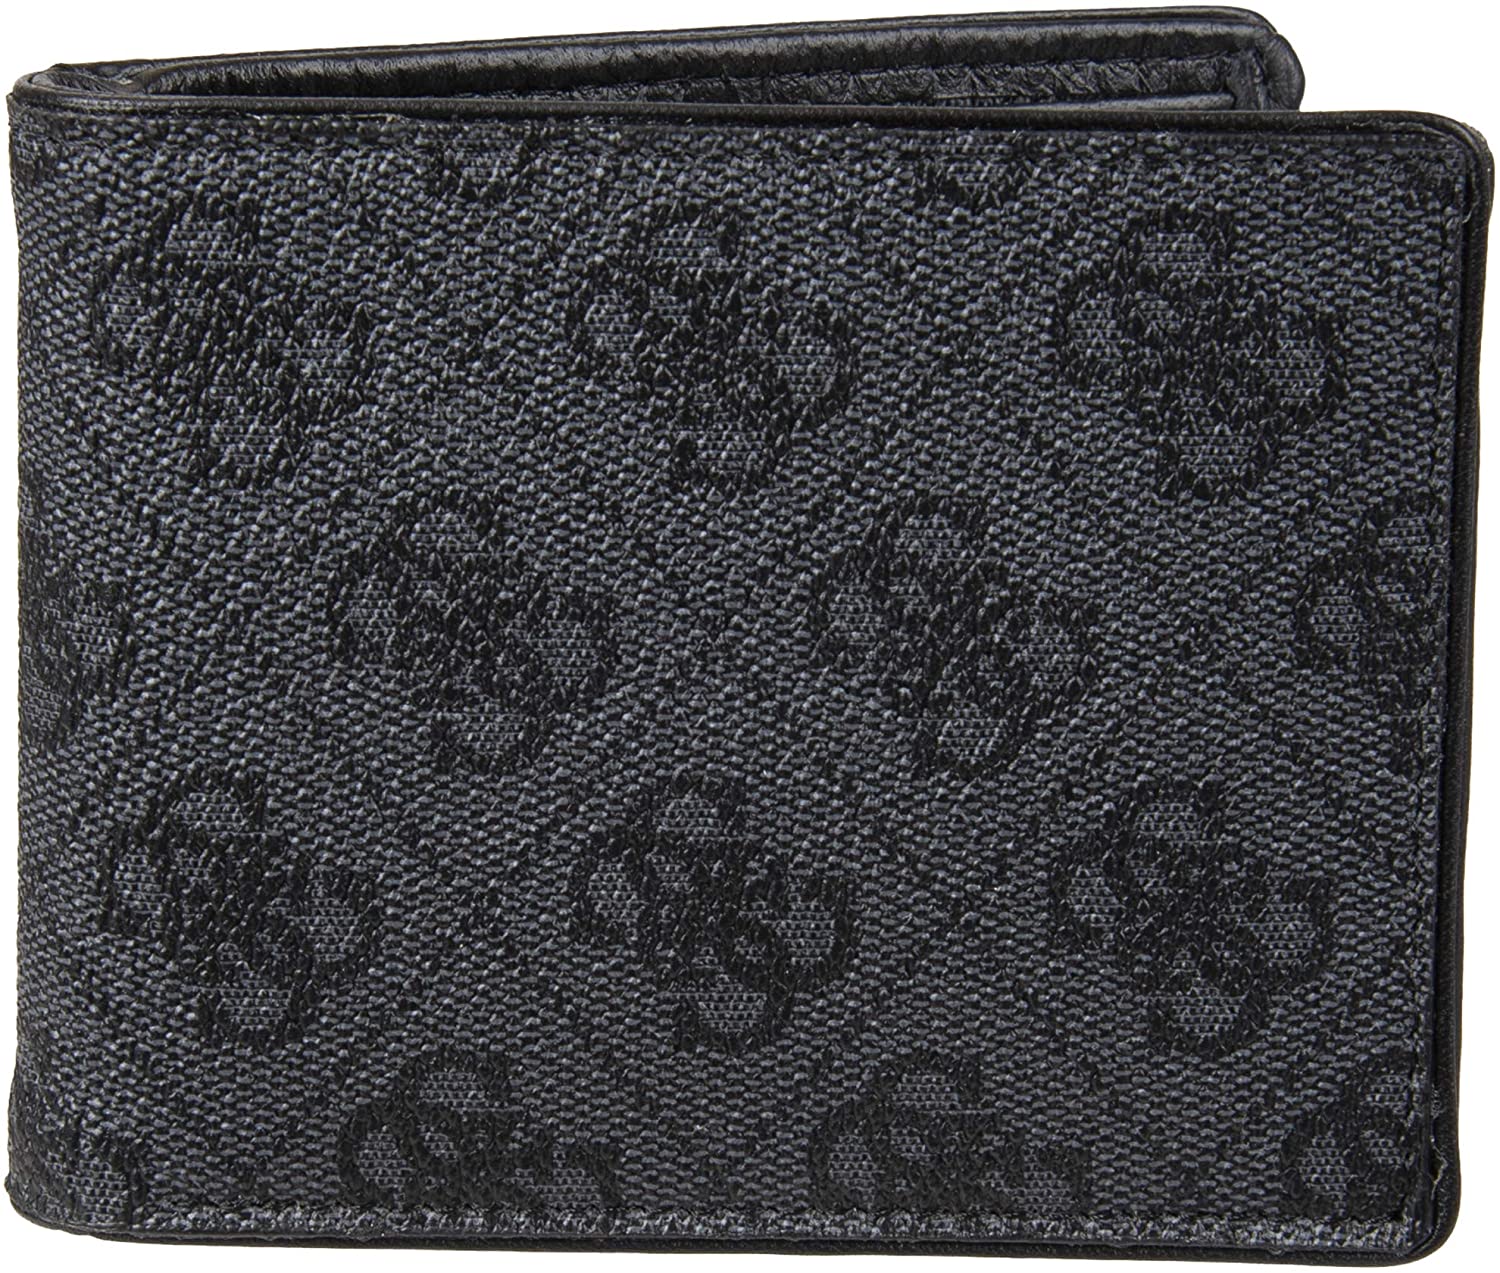 Guess Men's Leather Mesa Billfold Wallet - Black/Red